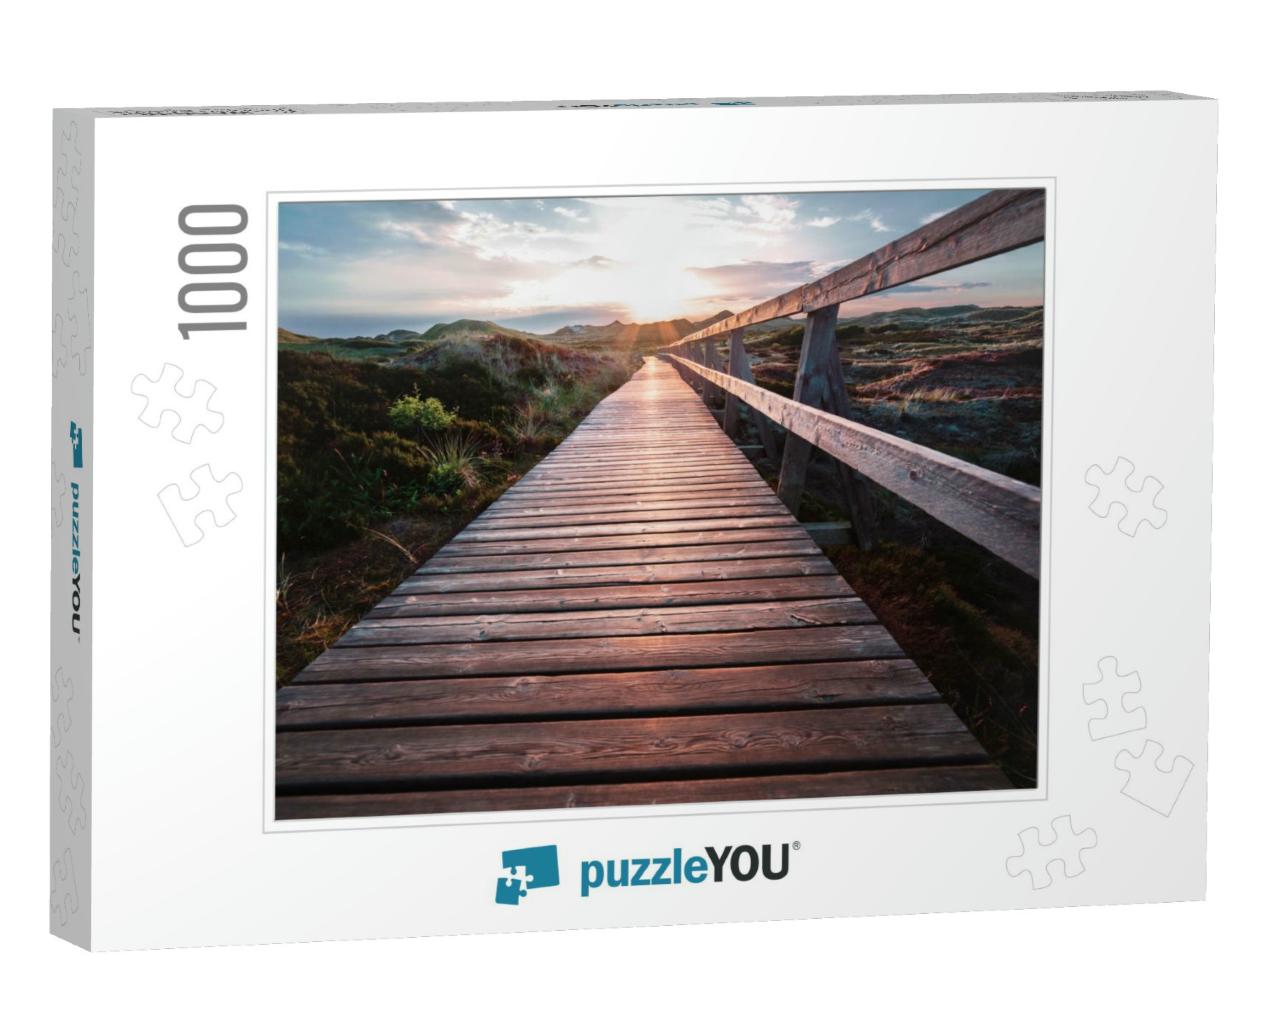 Deserted Wooden Boardwalk Leading Away Through Coastal Du... Jigsaw Puzzle with 1000 pieces